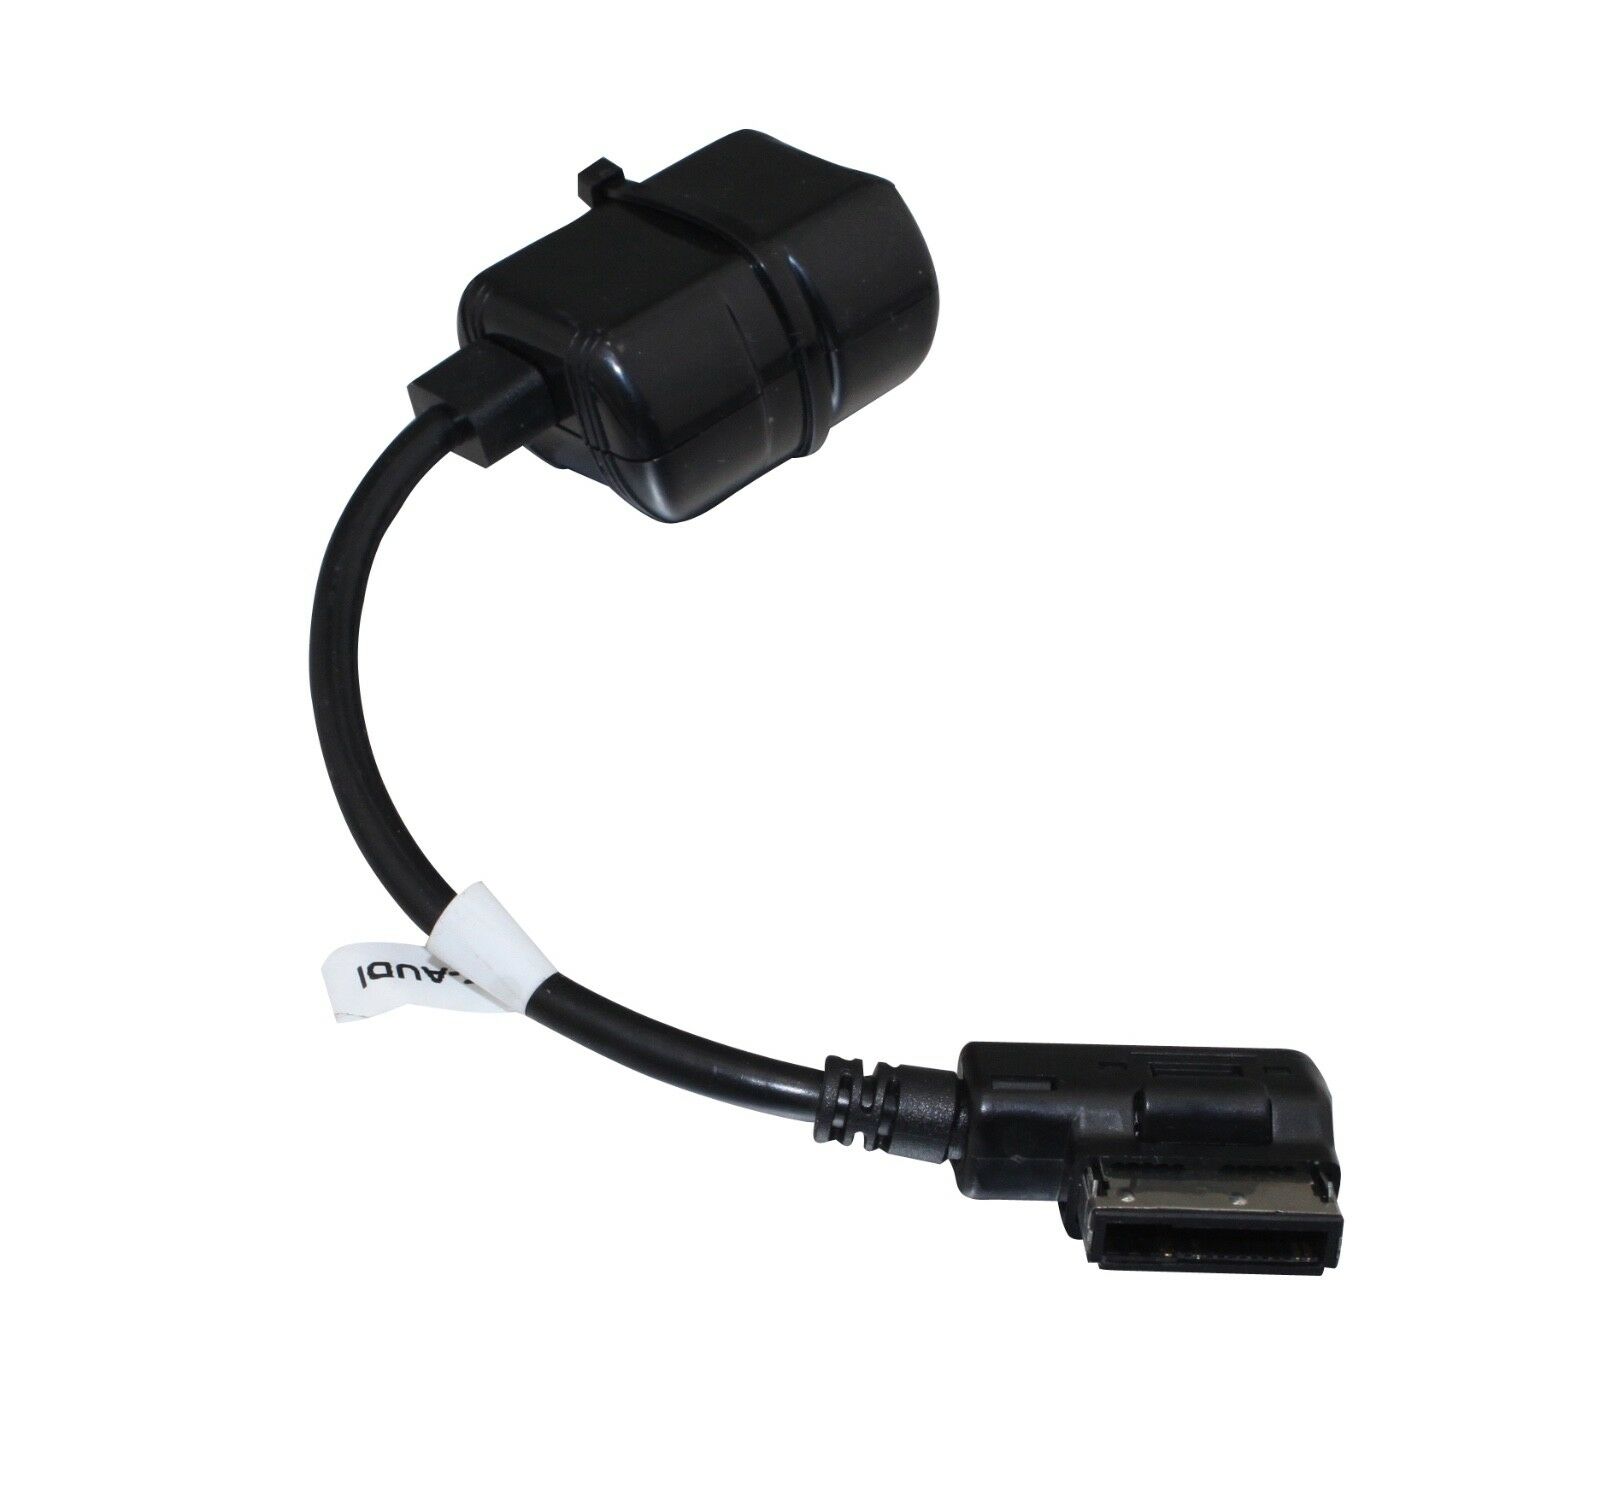 Nc Bluetooth Audio Adapter For Audi A3 A6 Q3 Q7 Ami For Samsung Htc Sony Iphone